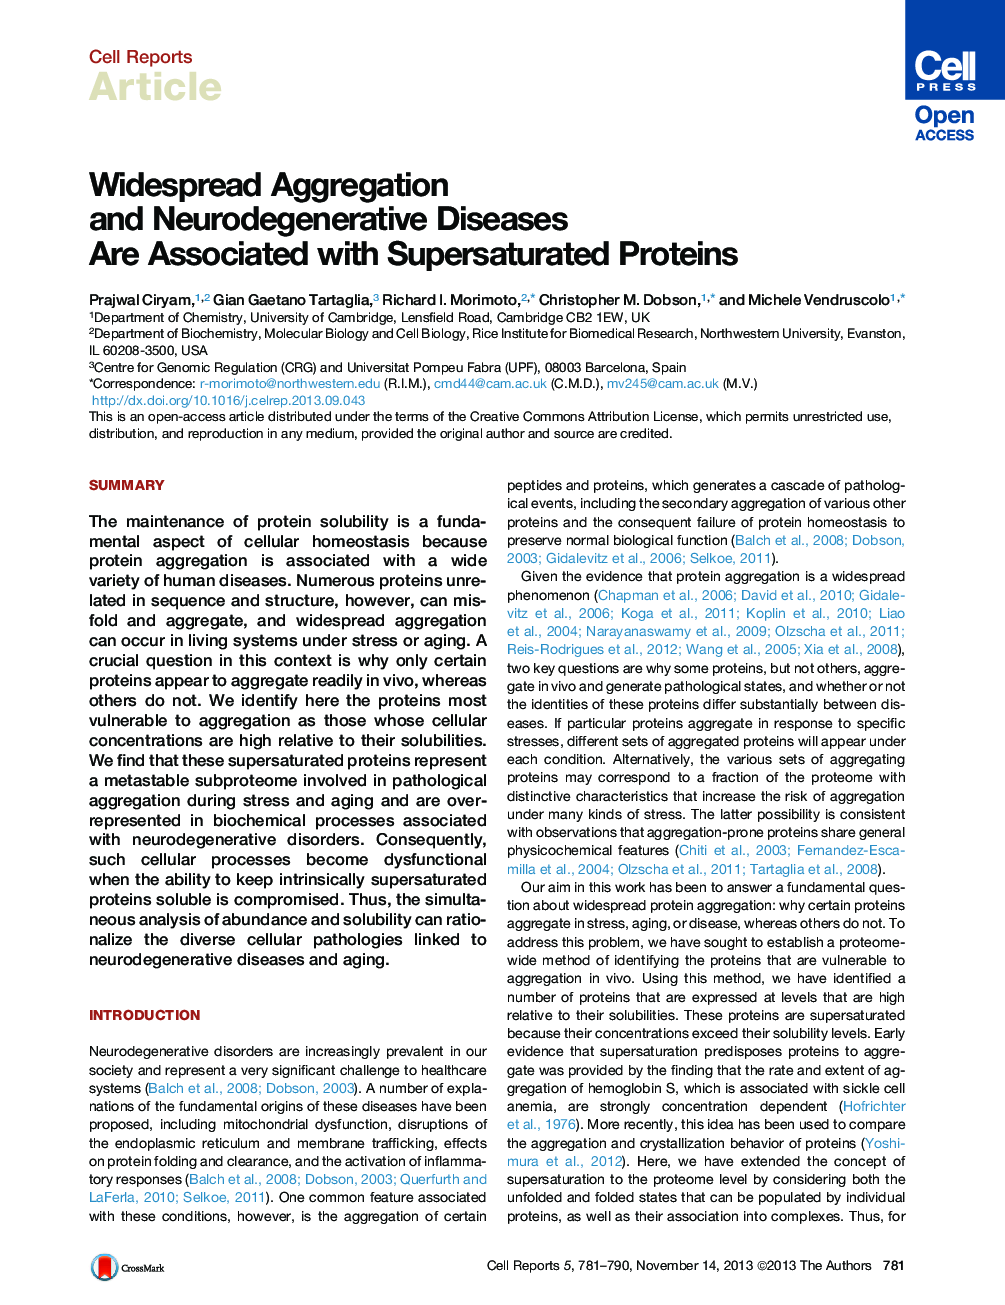 Widespread Aggregation and Neurodegenerative Diseases Are Associated with Supersaturated Proteins 